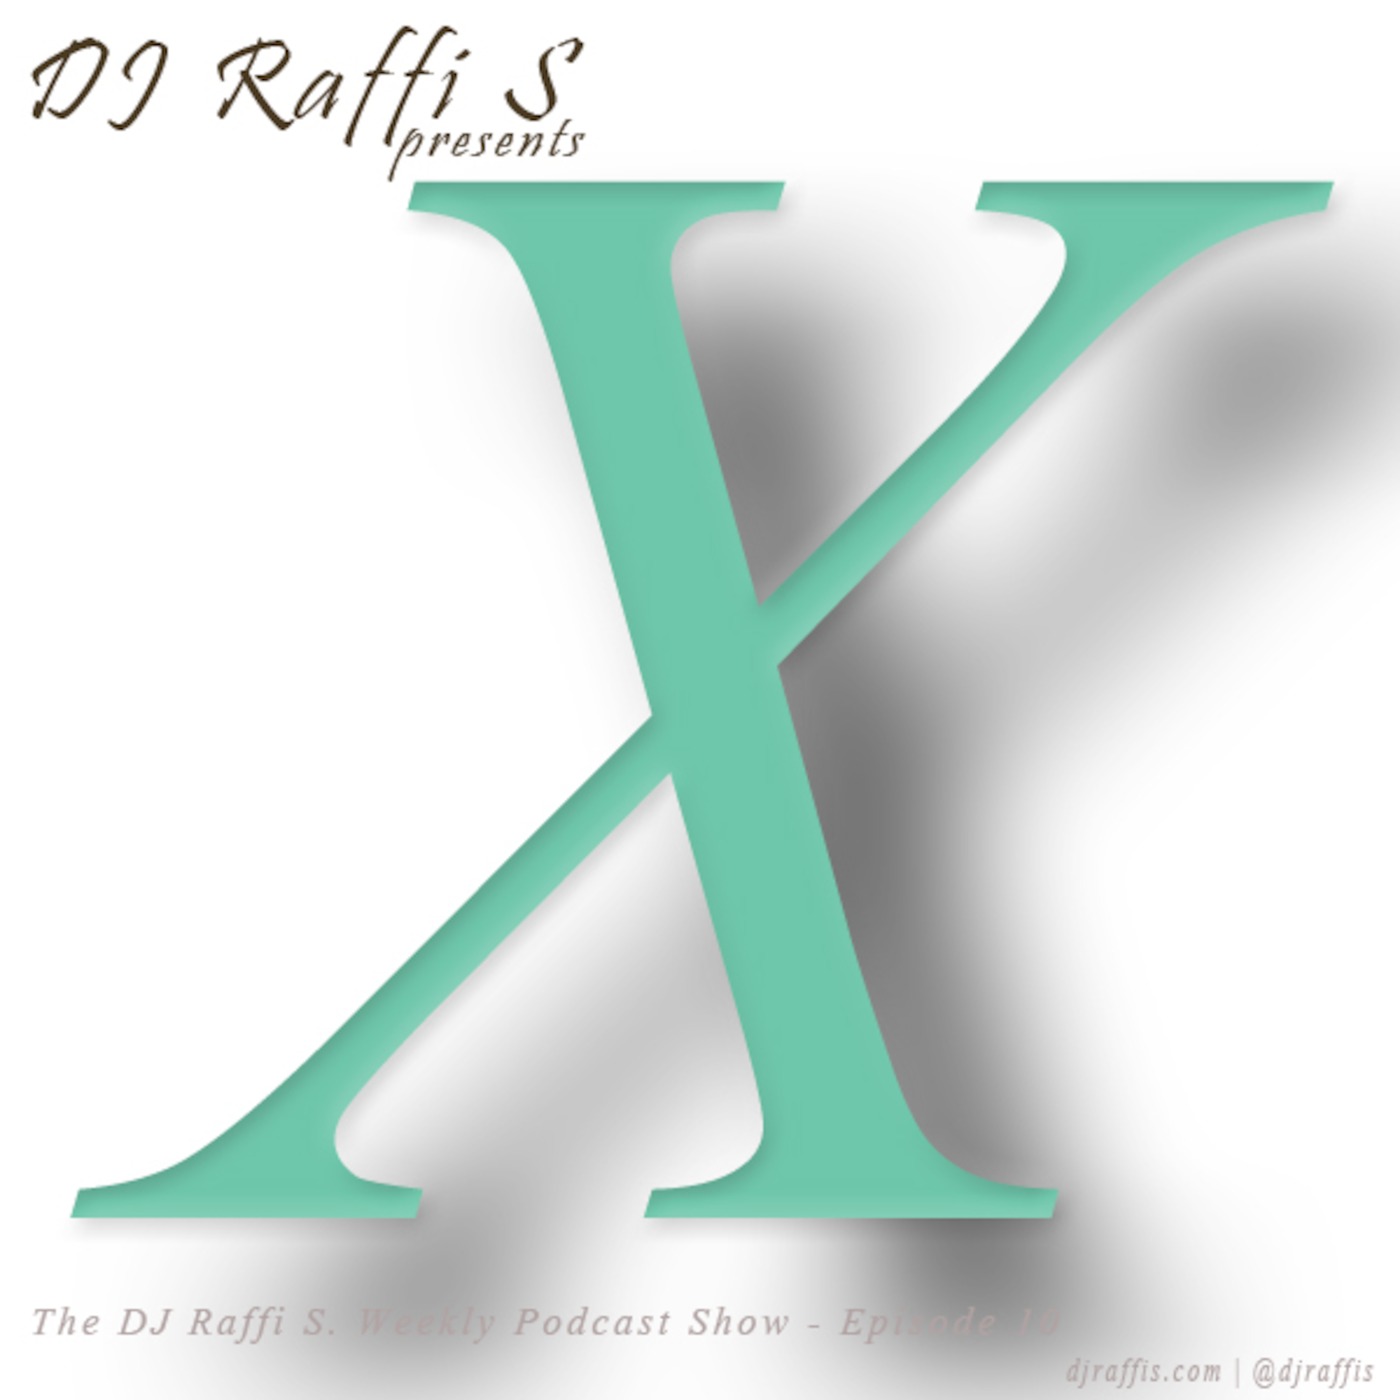 The DJ Raffi S. Weekly Podcast Show - Episode 10